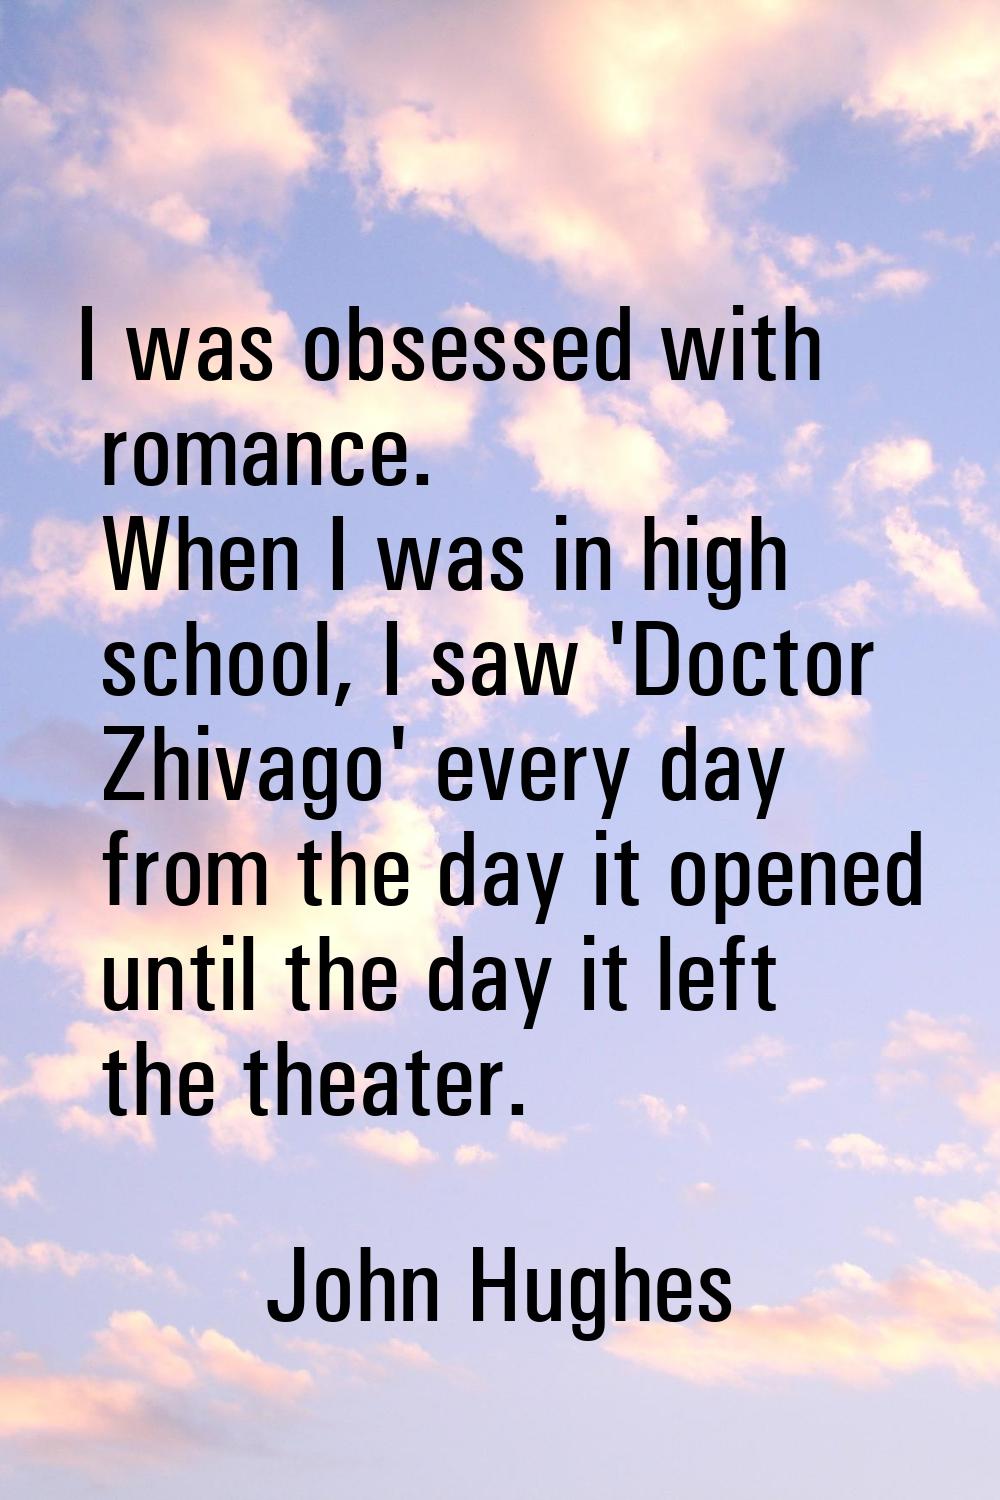 I was obsessed with romance. When I was in high school, I saw 'Doctor Zhivago' every day from the d